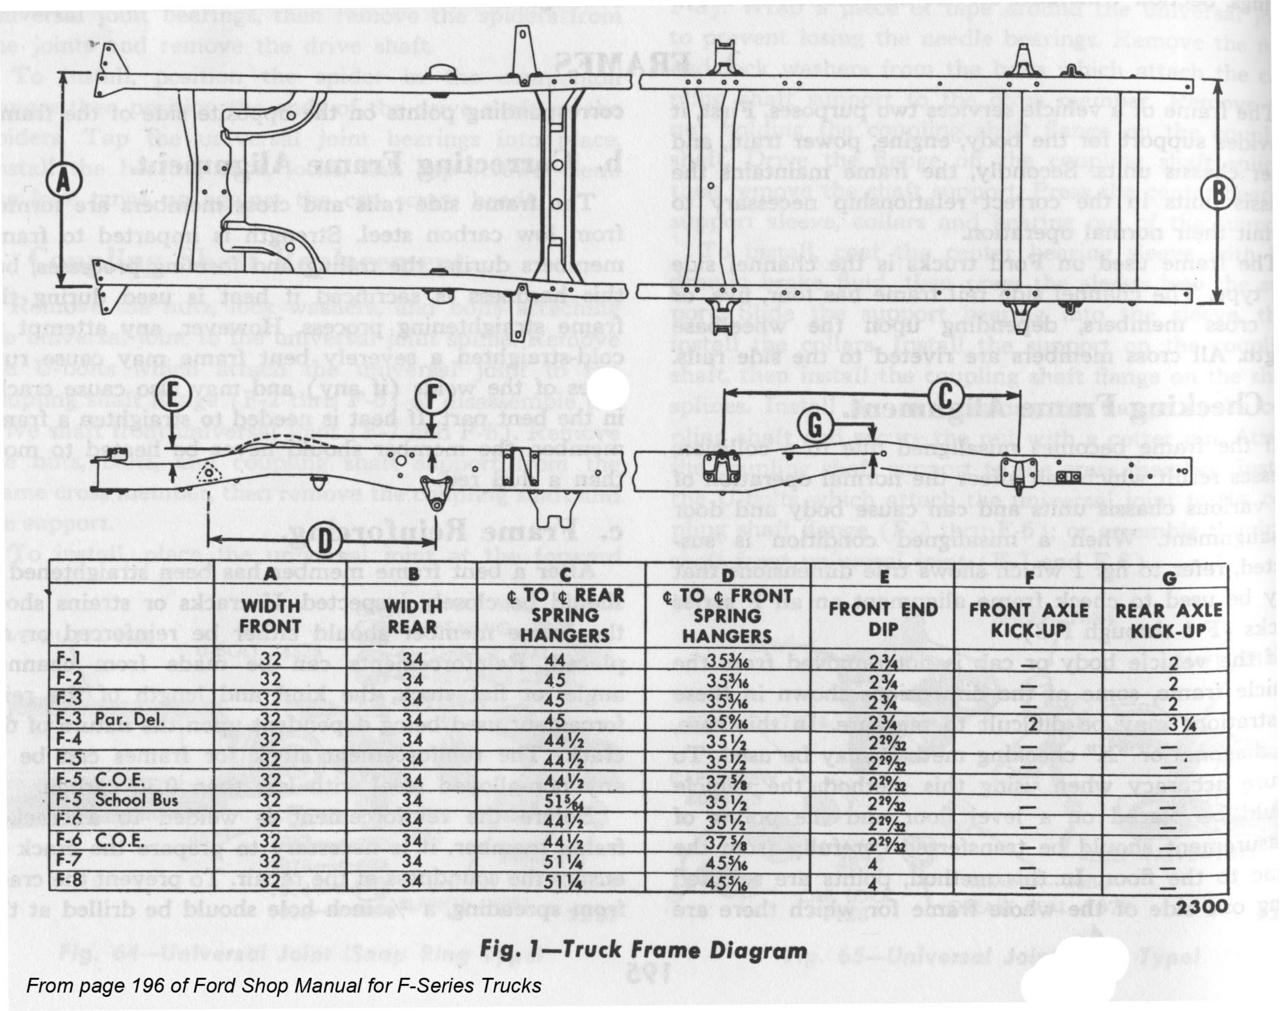 1950 Ford truck dimensions #4